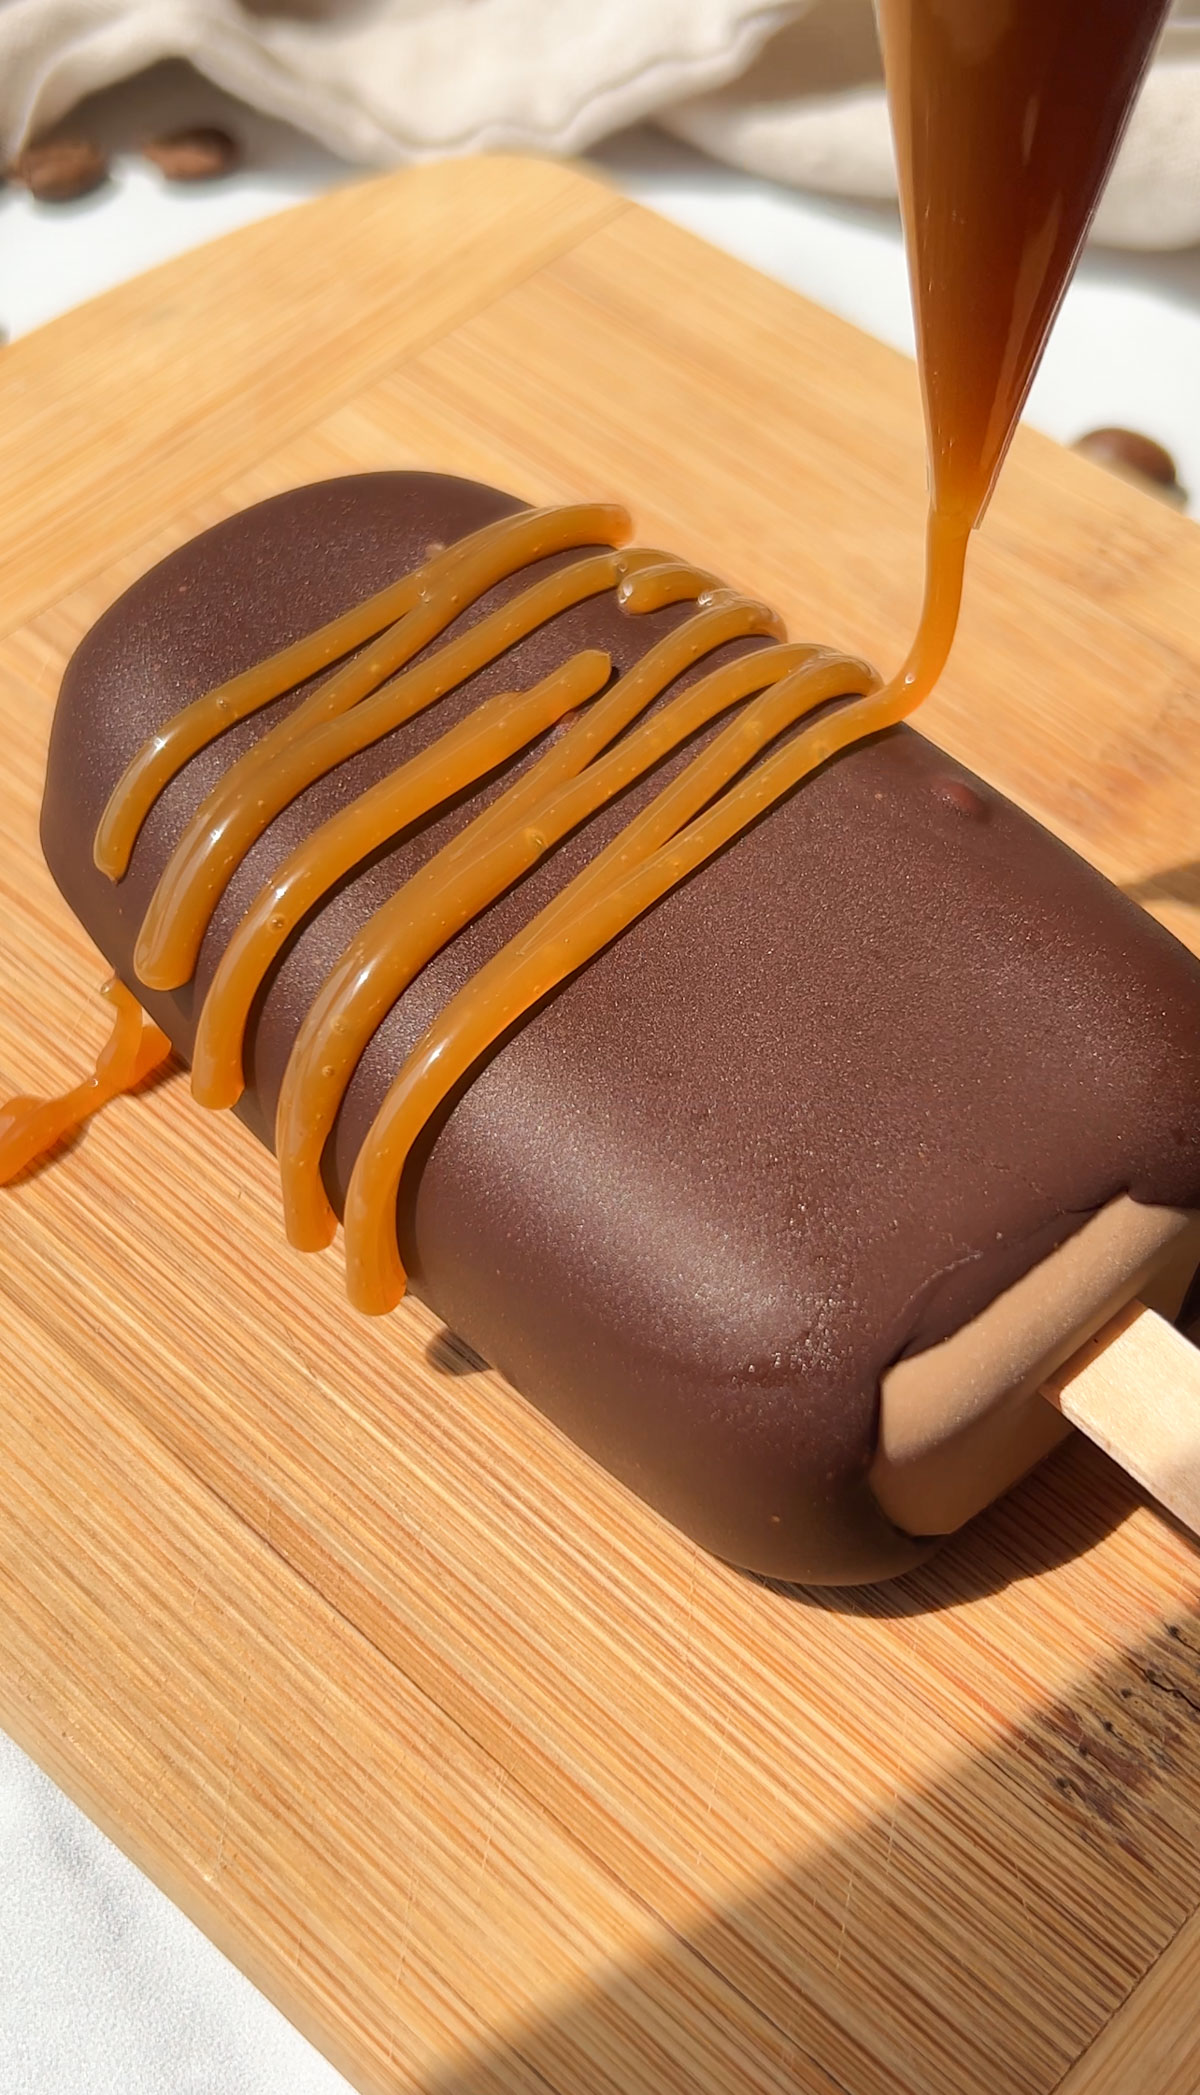 Drizzling the vegan coffee ice cream bars with caramel.